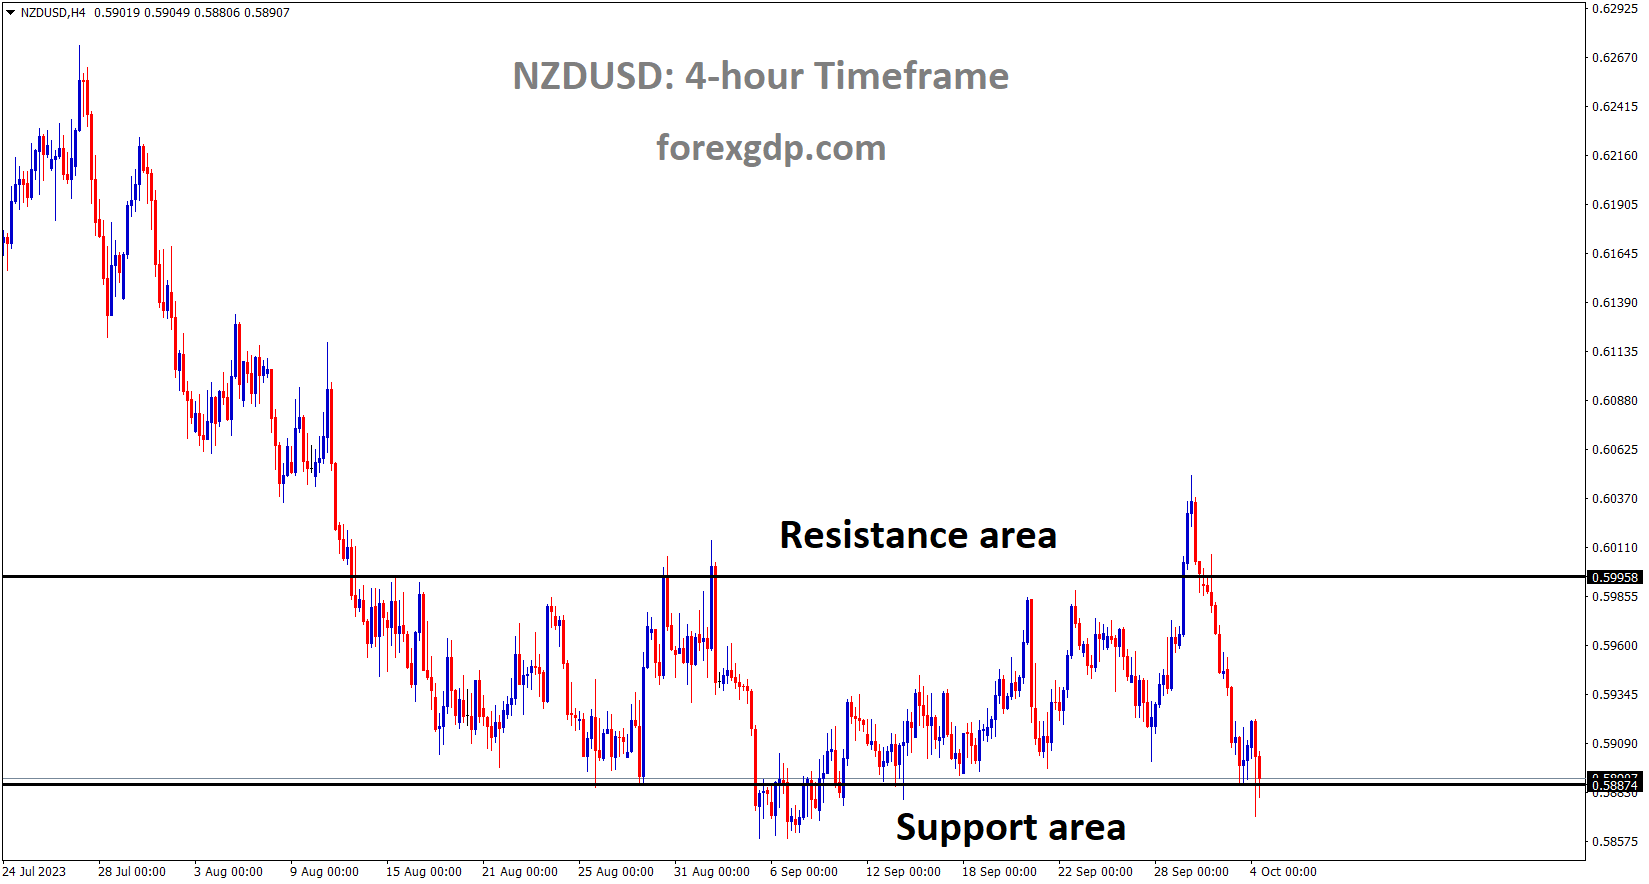 NZDUSD is moving in the Box pattern and the market has reached the Support area of the pattern